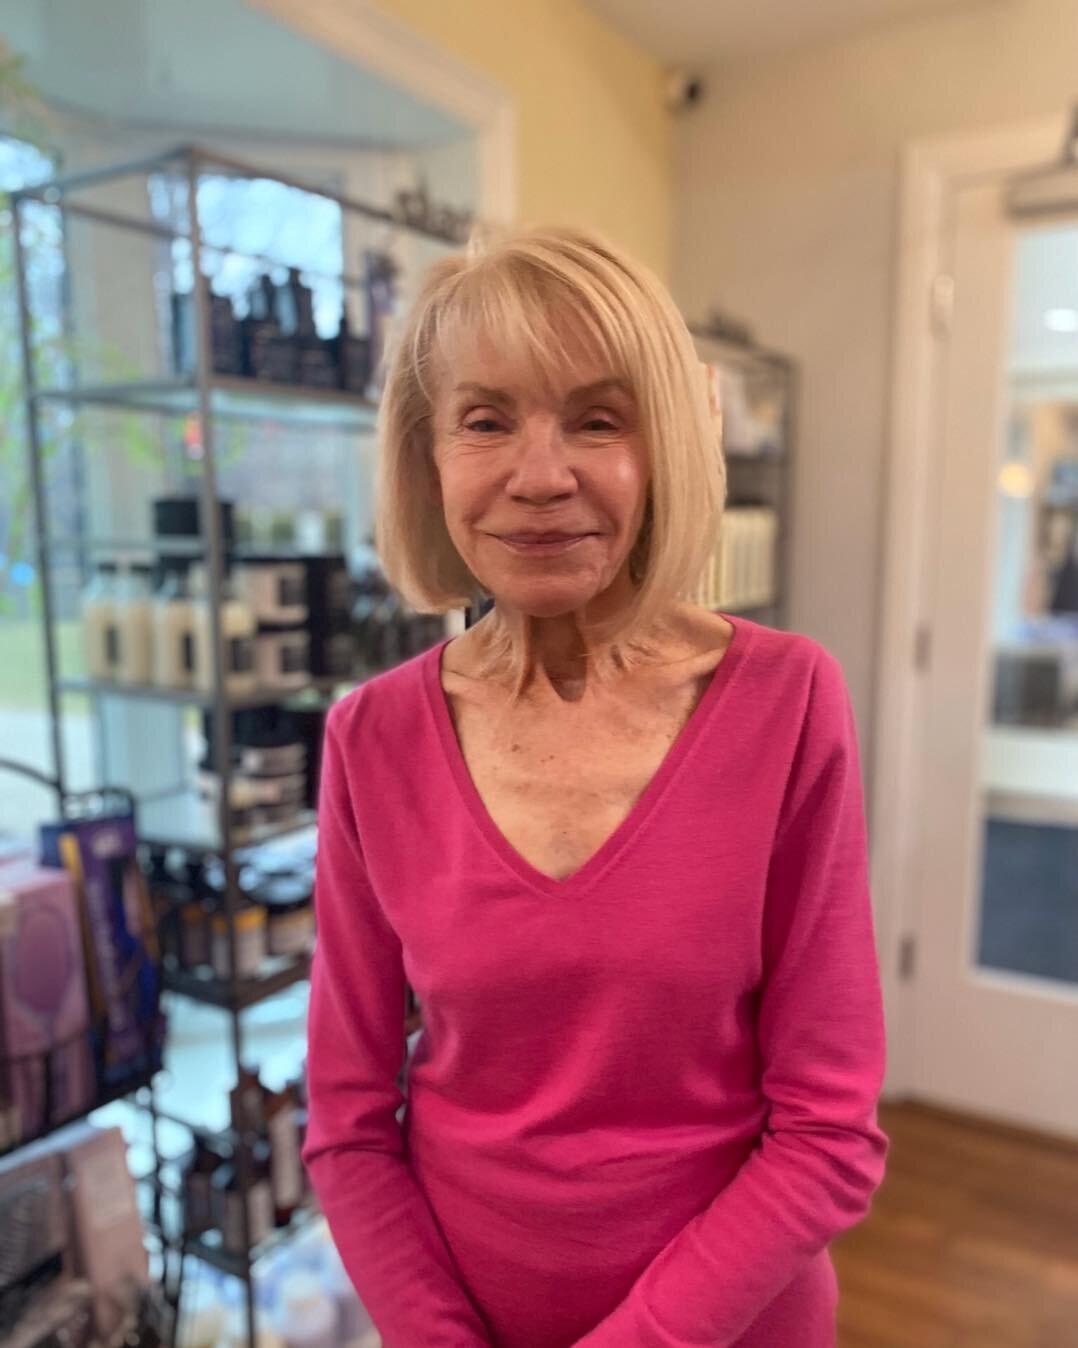 Timeless Beauties of Willow Creek Salon✨Celebrating Beauty at all Ages! Meet Elaine!
-
Color and Cut by Mary
-
#ohiosalons #willowcreeksalon #sylvaniabusiness #toledosalon #forsylvania #timelessbeauties